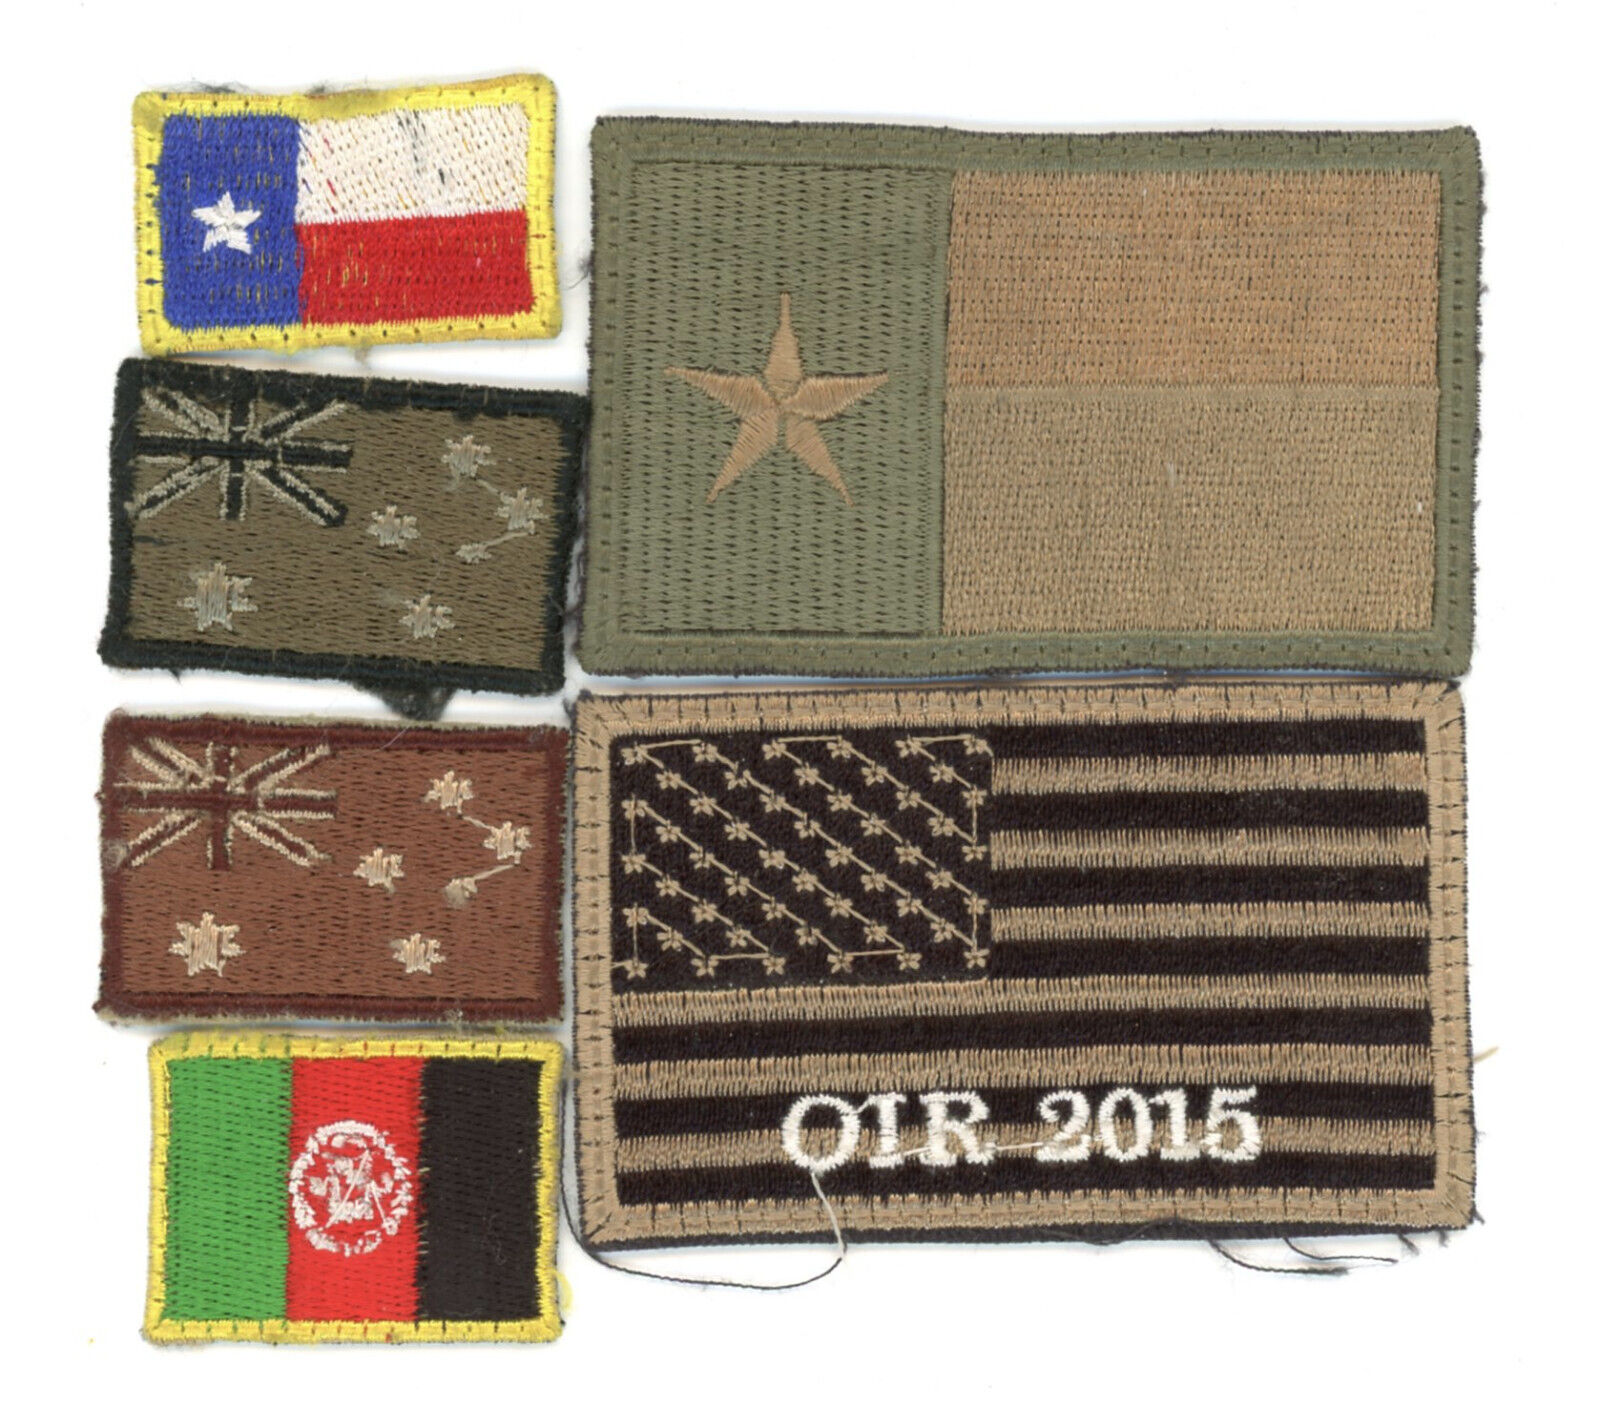 Flags Operation Inherent Resolve Iraq Iraqi Theater made woven Patches OIR Texas